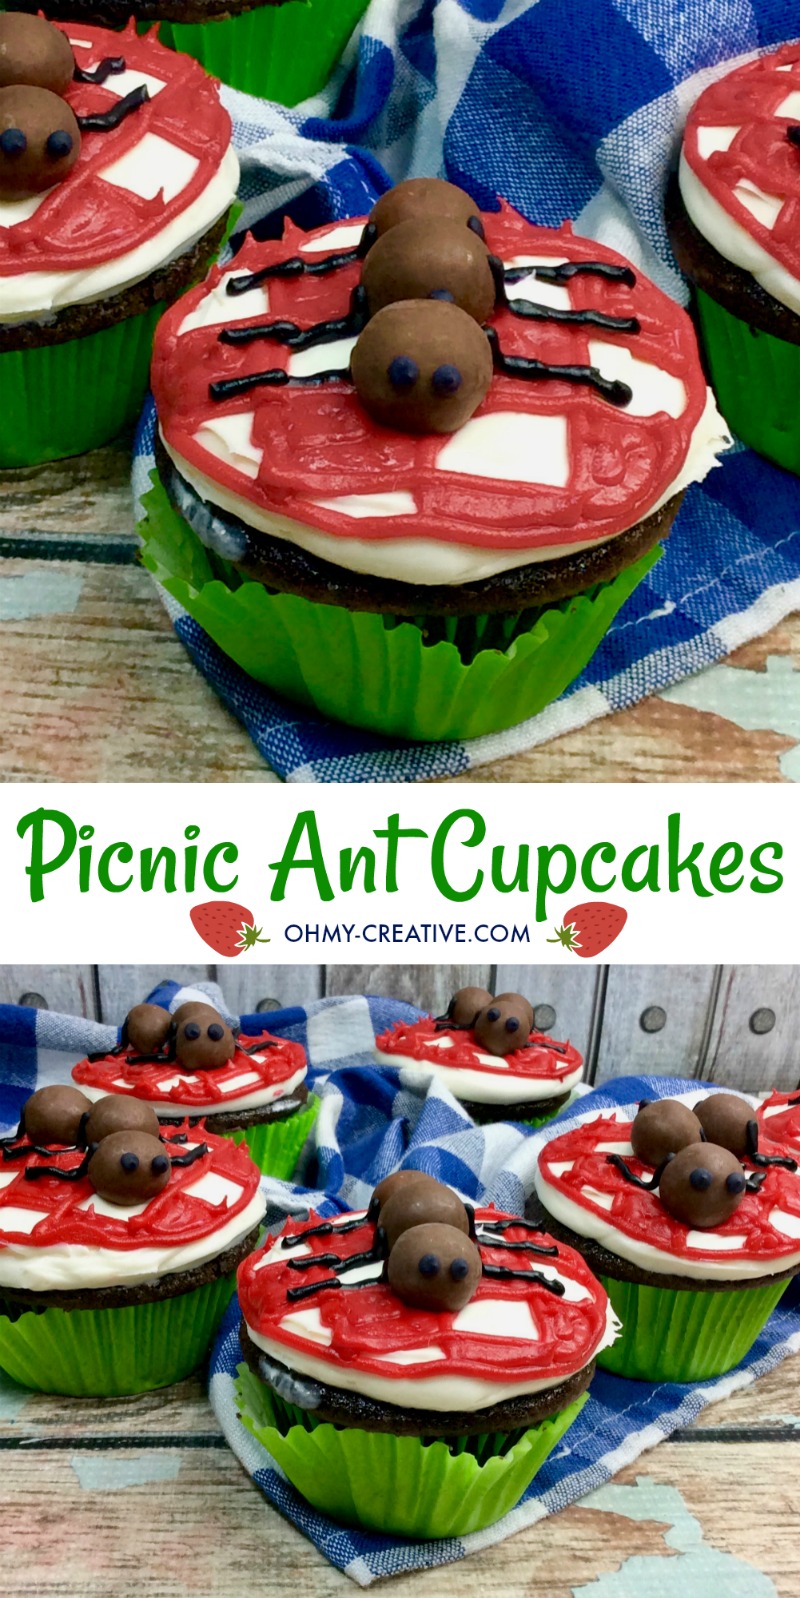 These Ant Picnic Cupcakes are perfect to add to your picnic menu! | OHMY-CREATIVE.COM | picnic idea | Picnic food | picnic dessert | easy picnic food | picnic table cupcakes | best picnic foods | good picnic foods | ant cupcakes | malted milk ball ants 